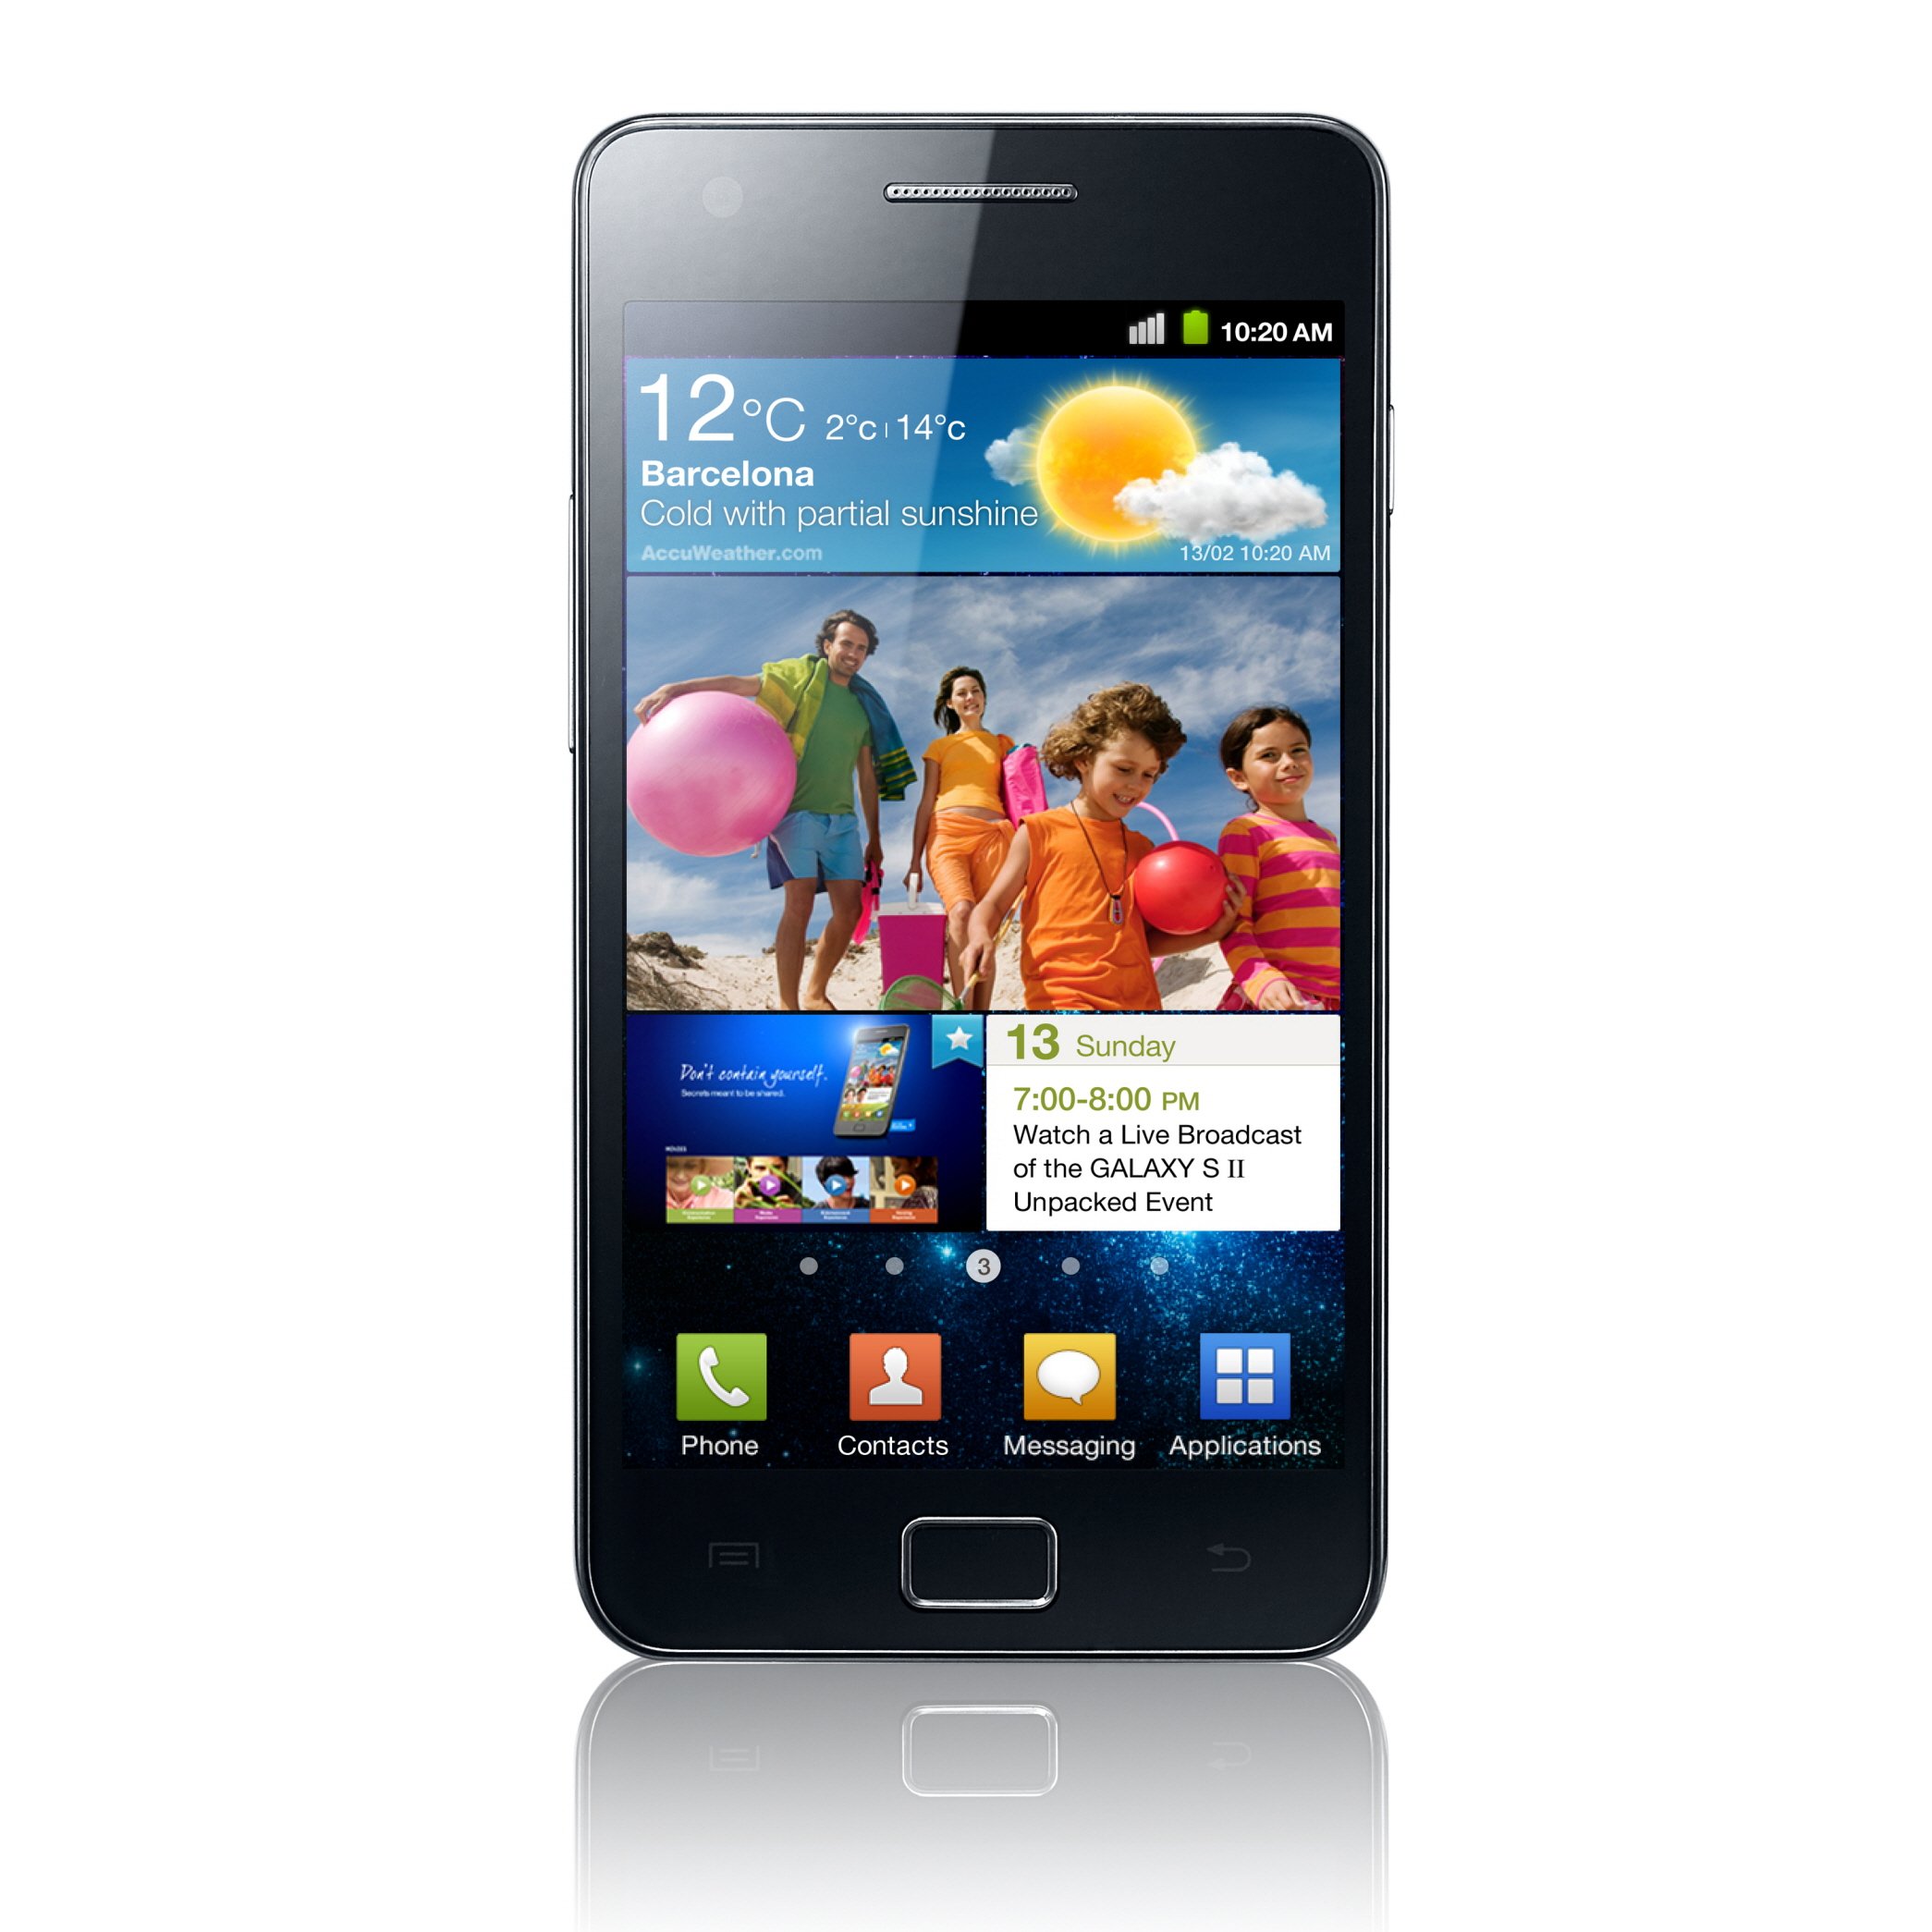 Samsung Galaxy S2 Specs, Review, Release Date - Phonesdata